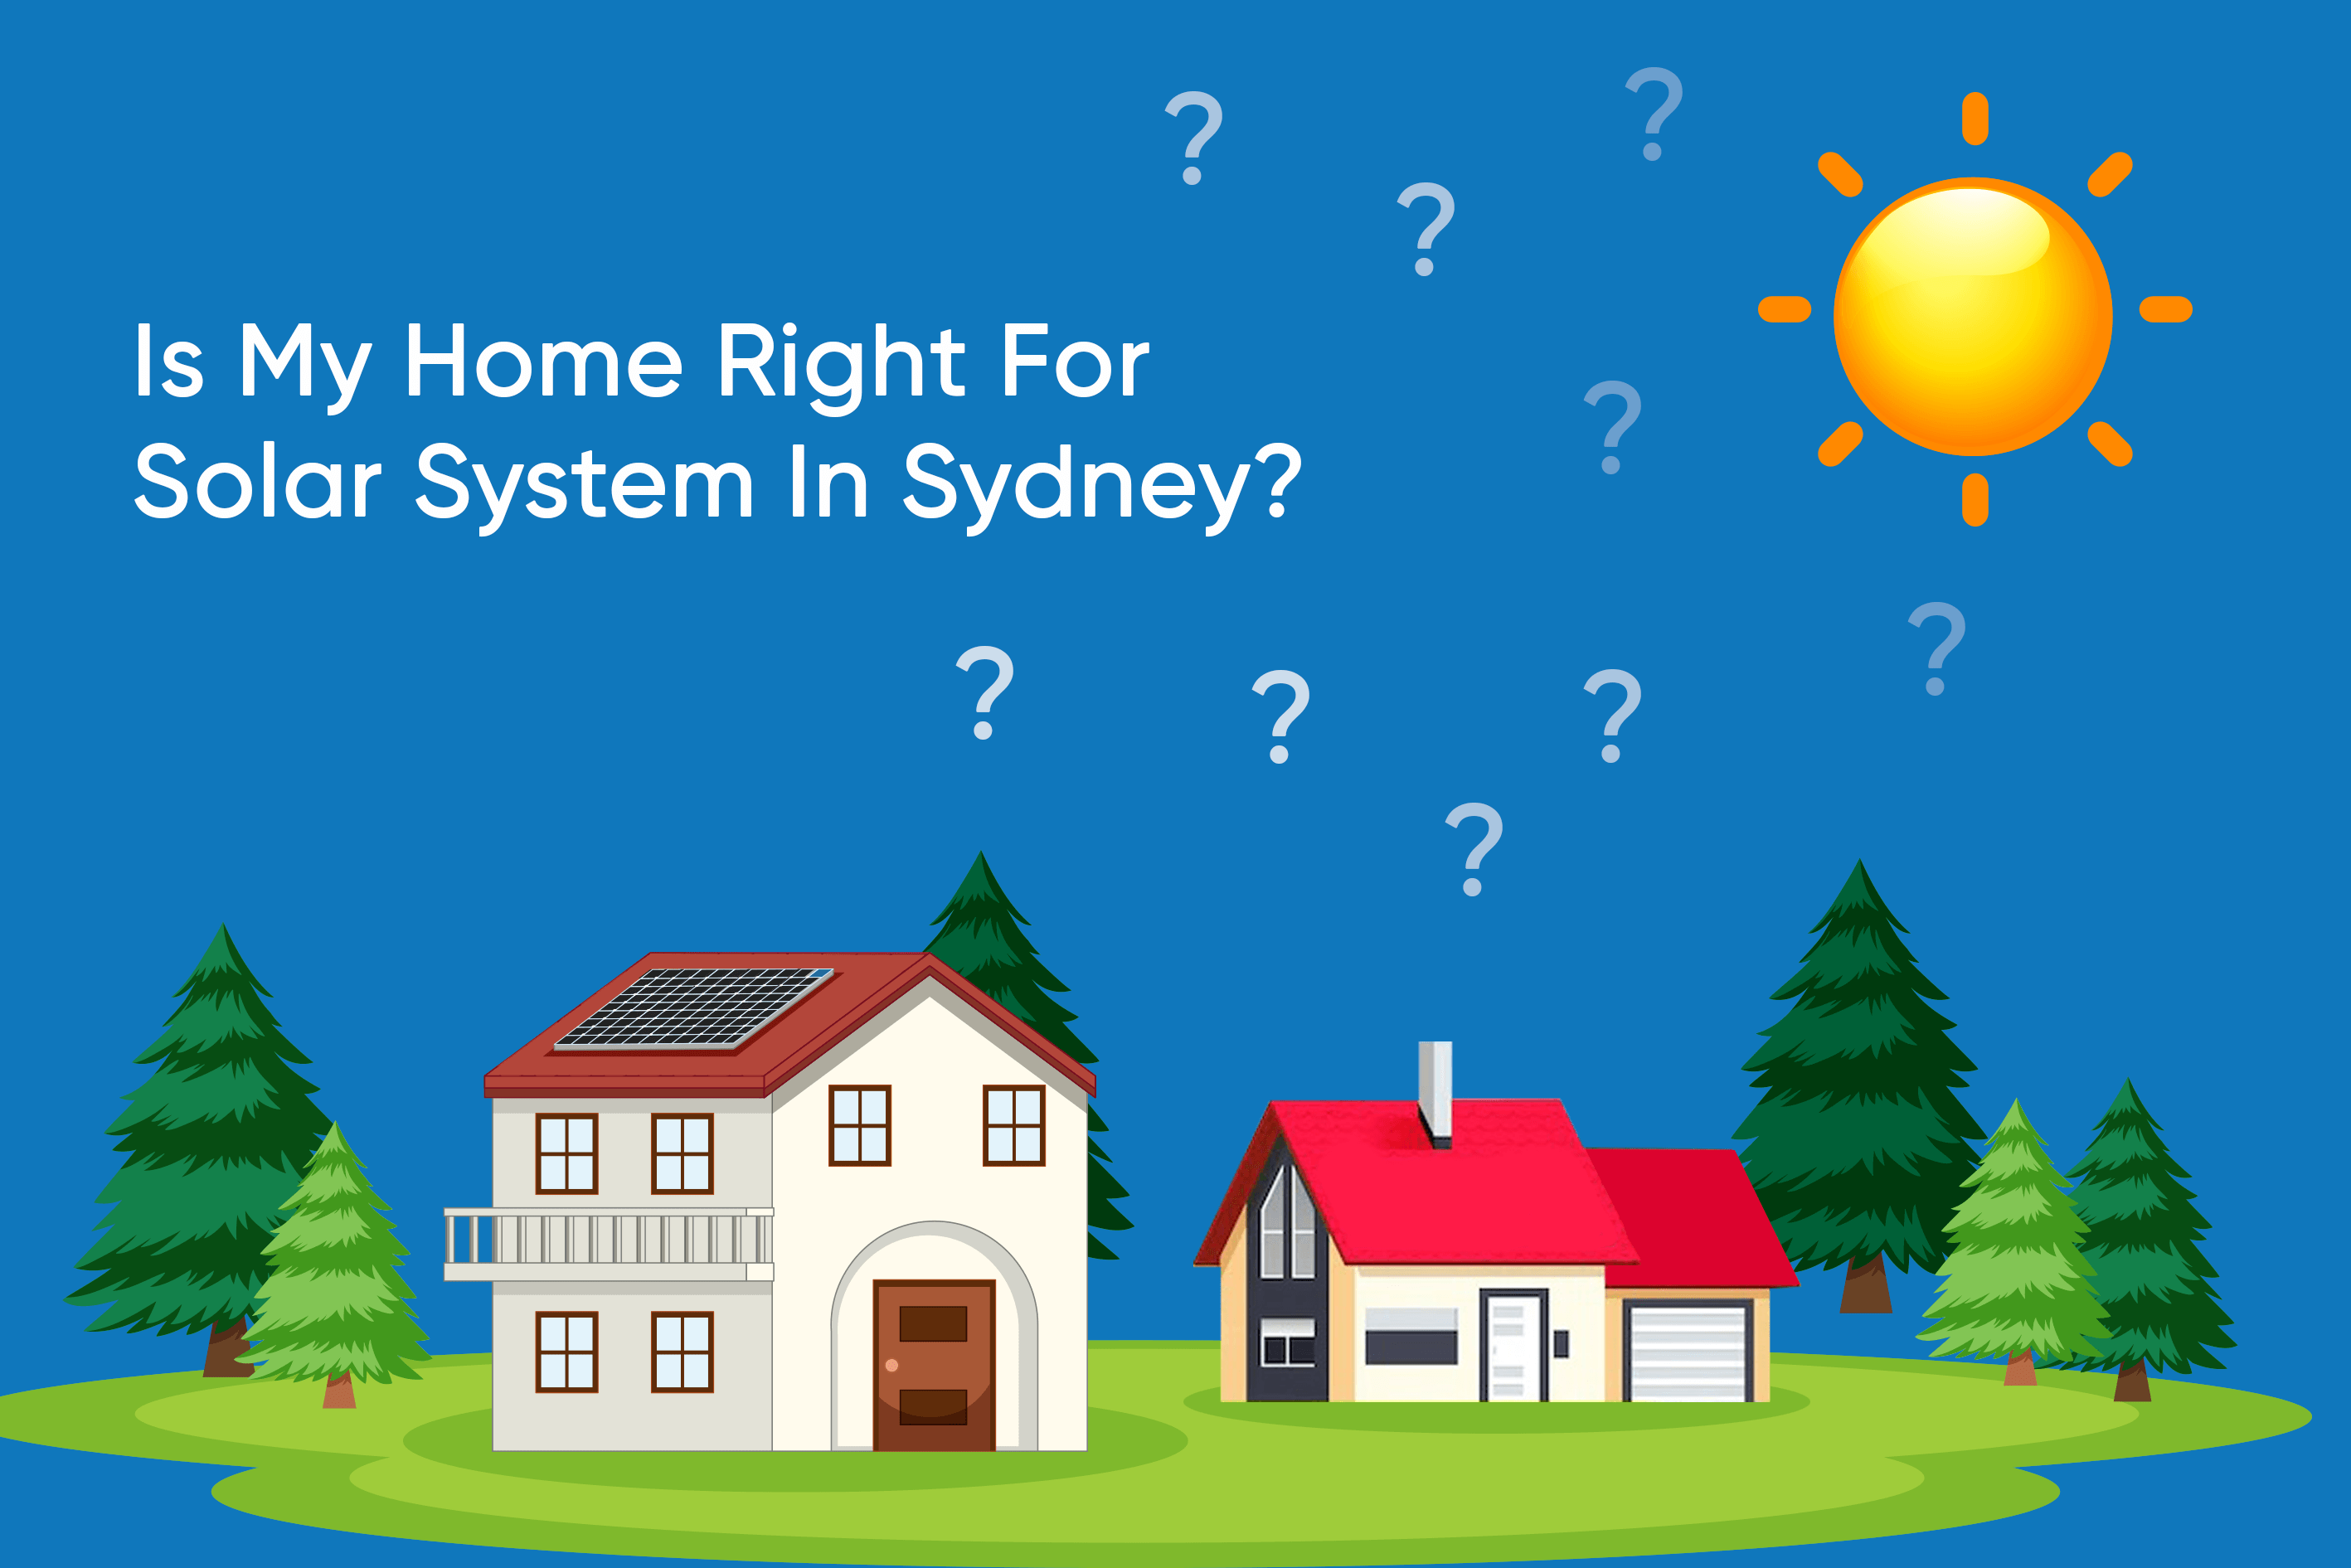 is my home right for solar system in sydney?